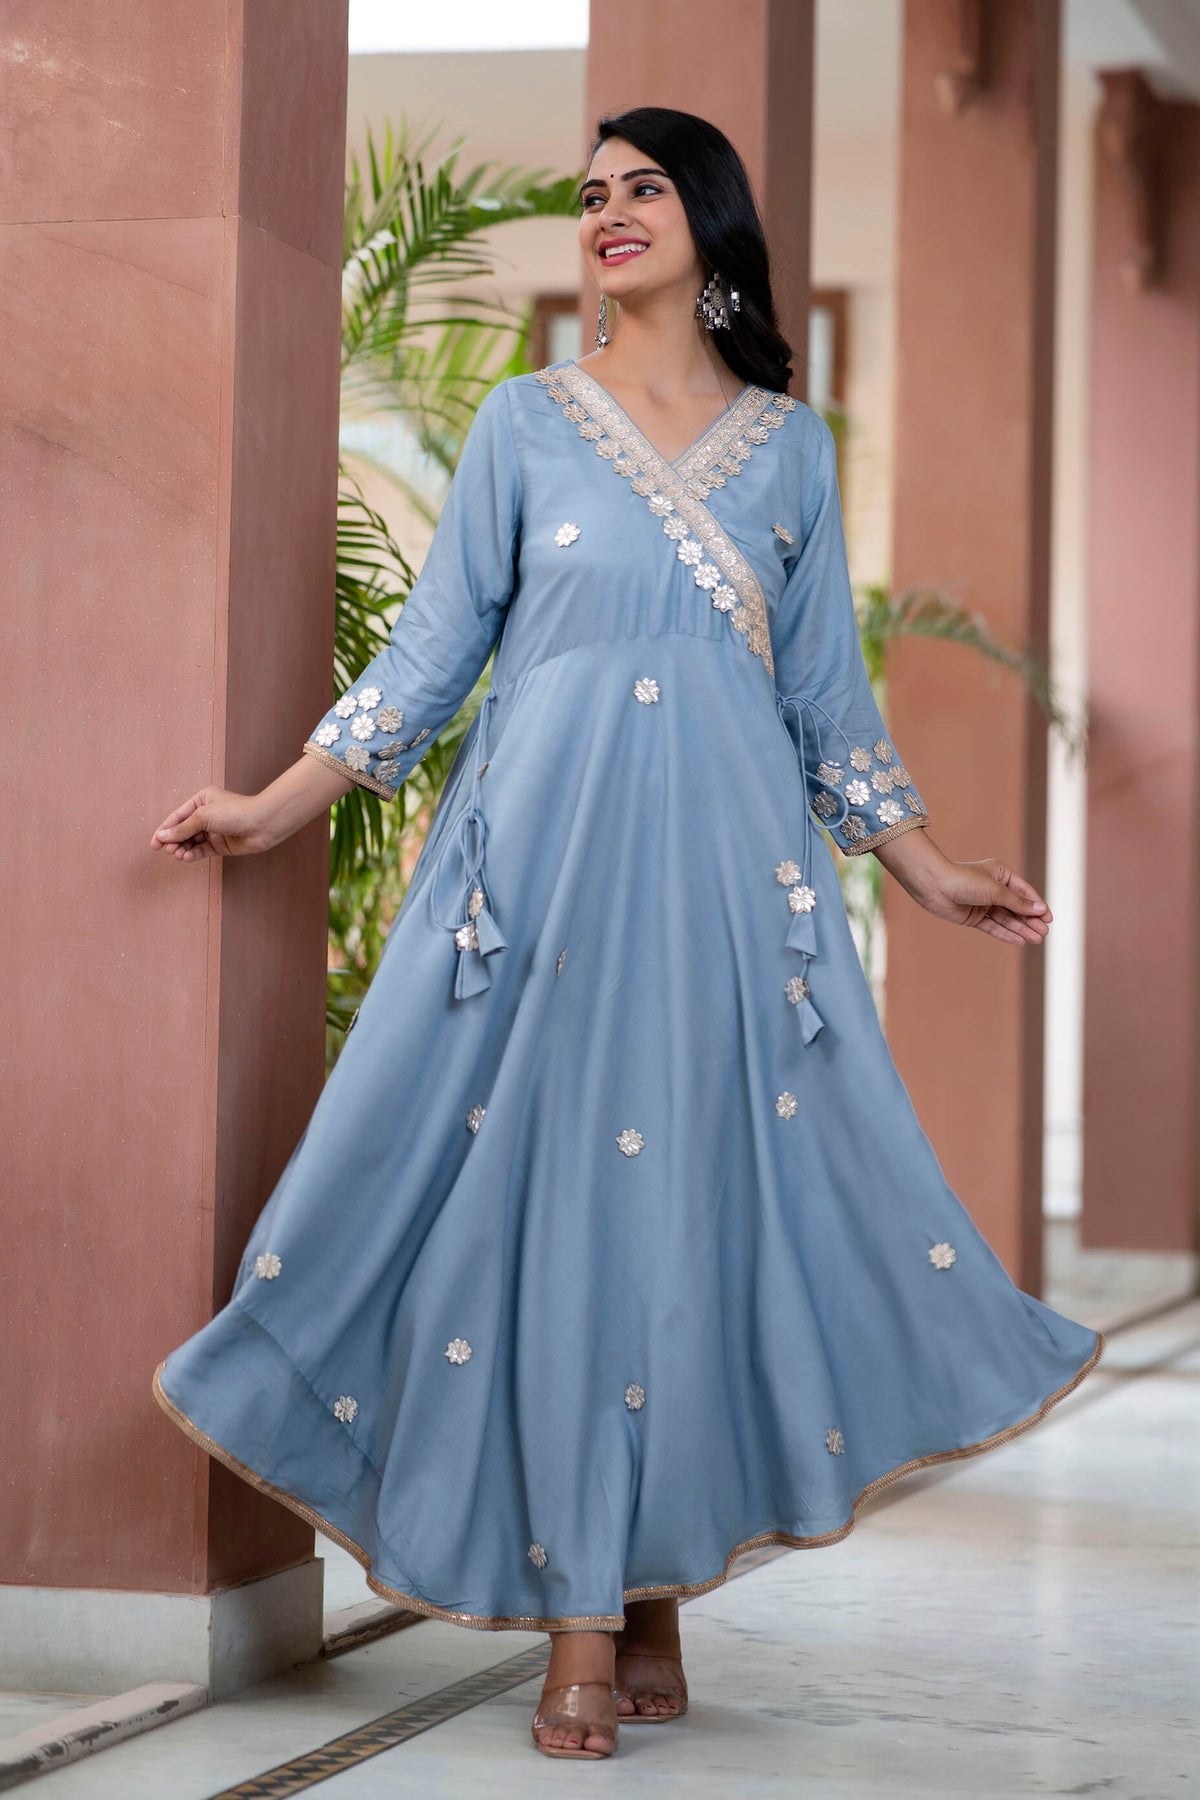 Cotton Village - Comfortable and Contemporary Indian Wear